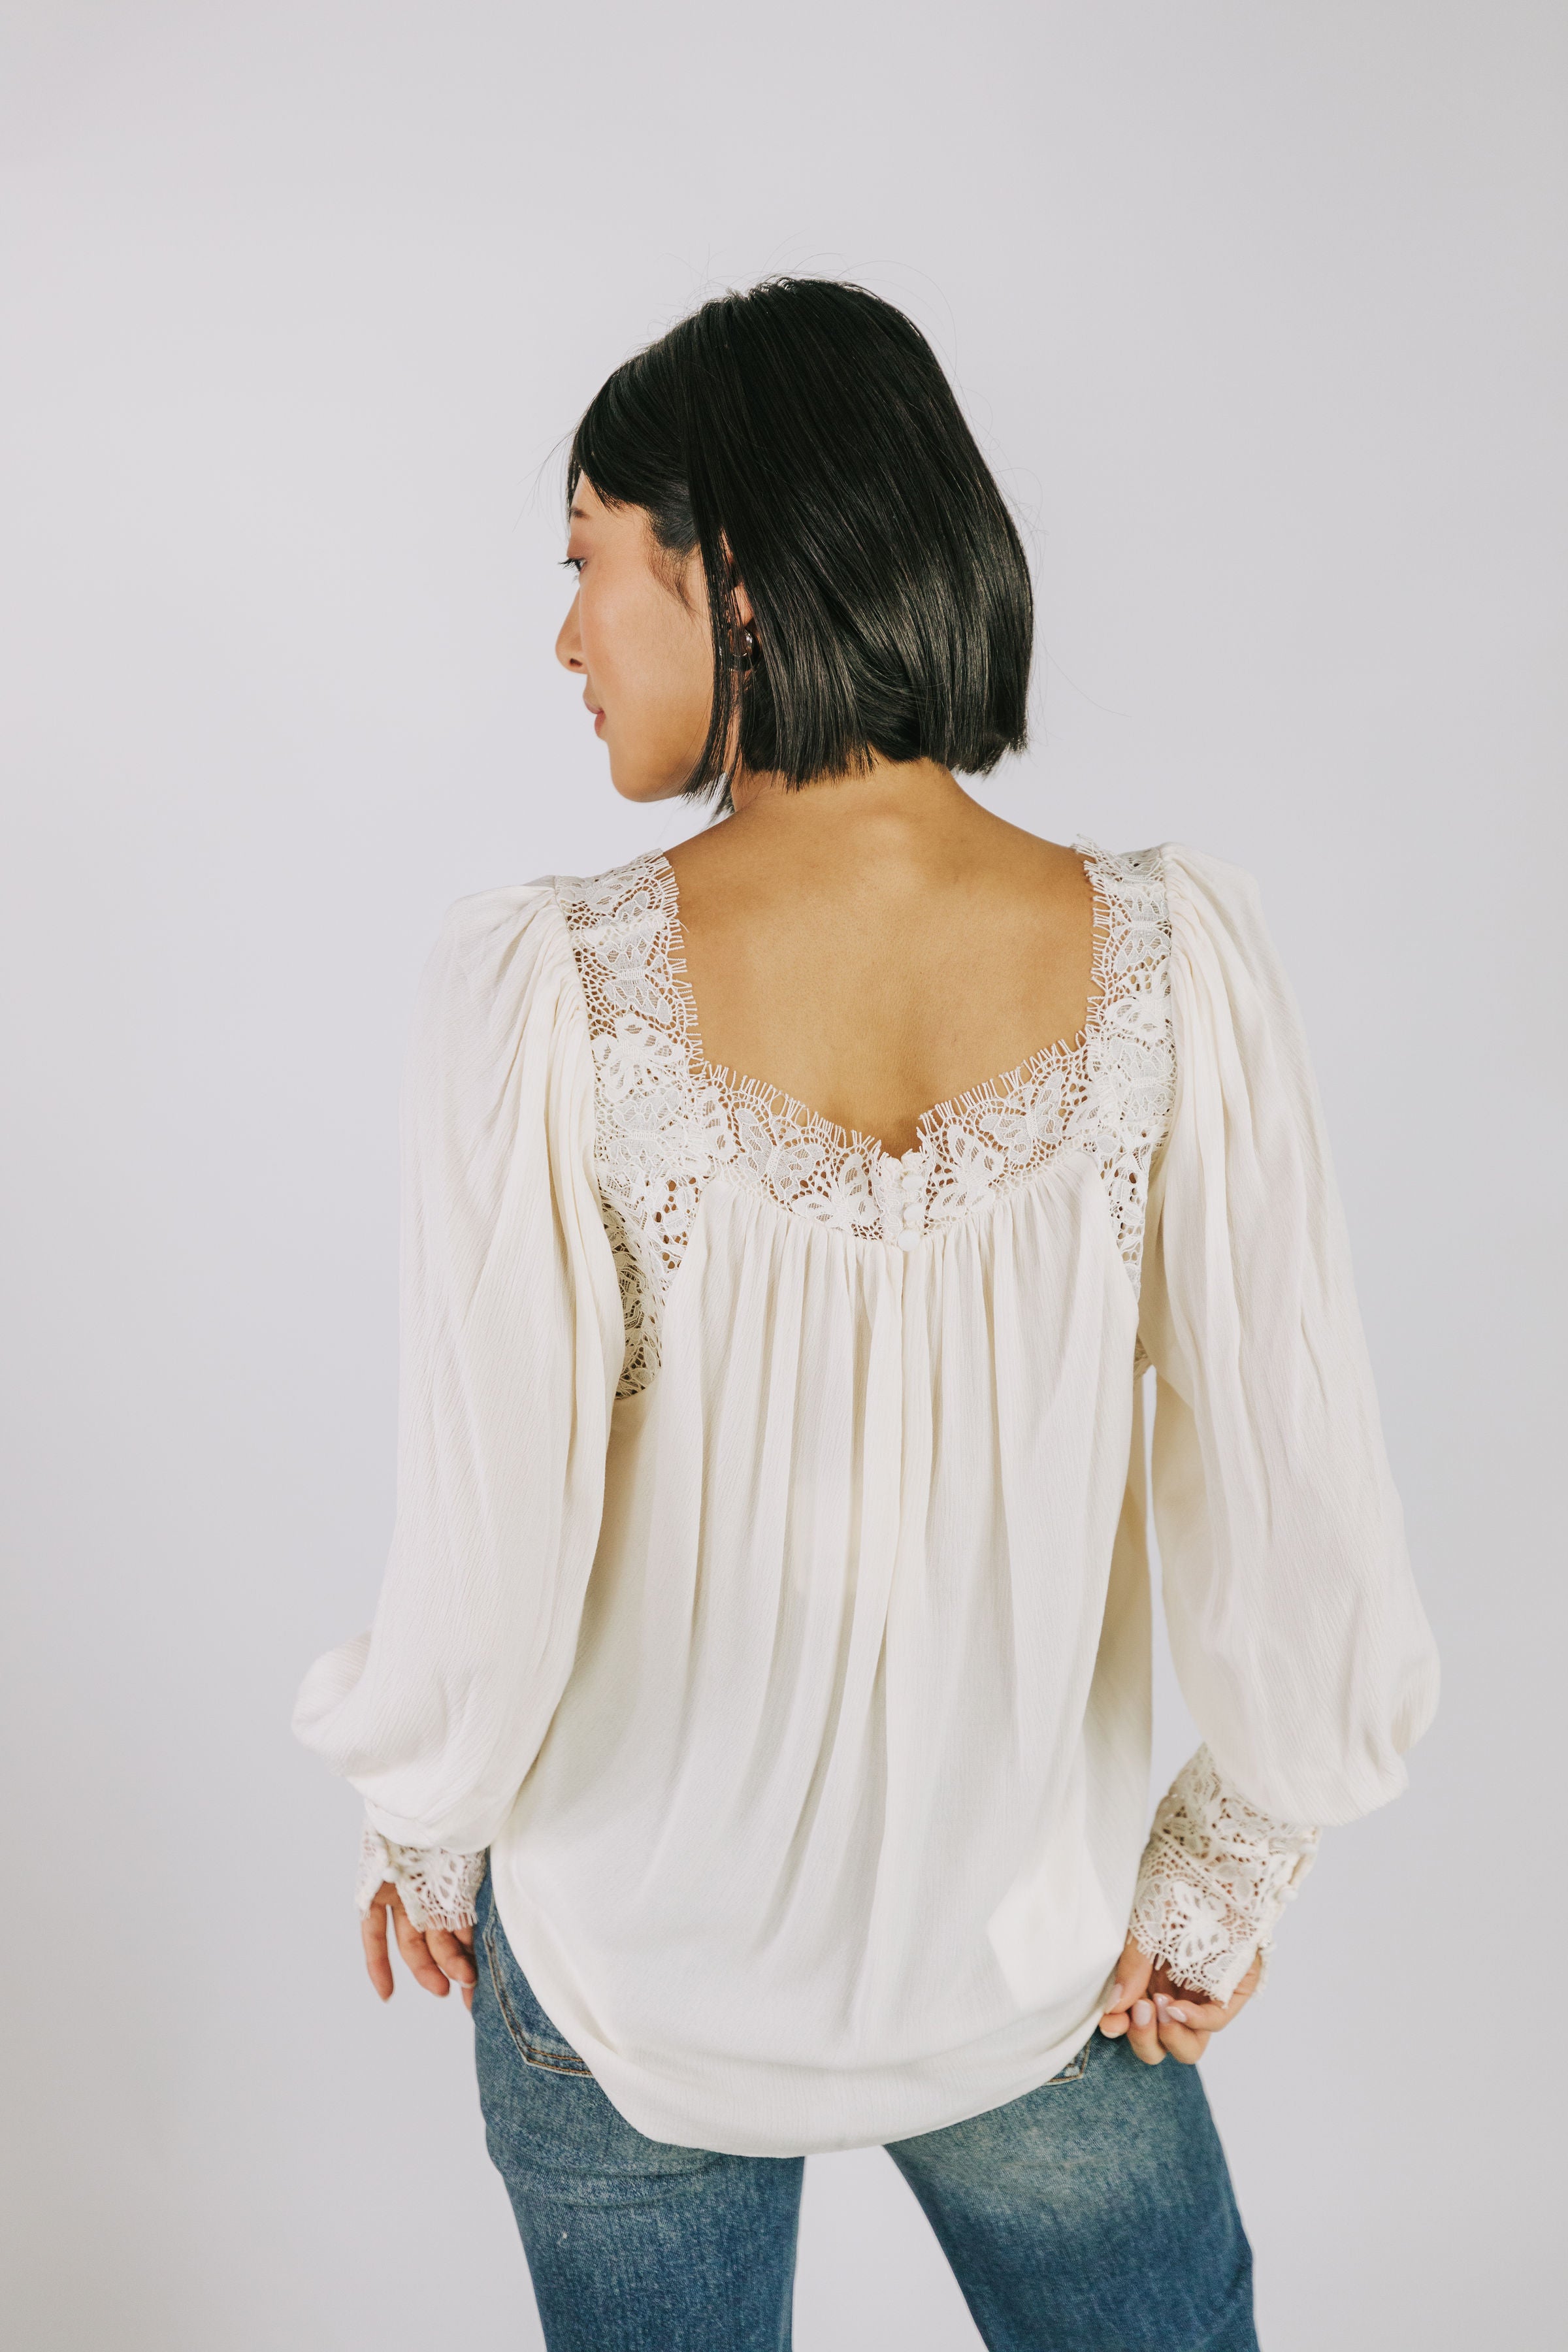 FREE PEOPLE - Flutter By Top